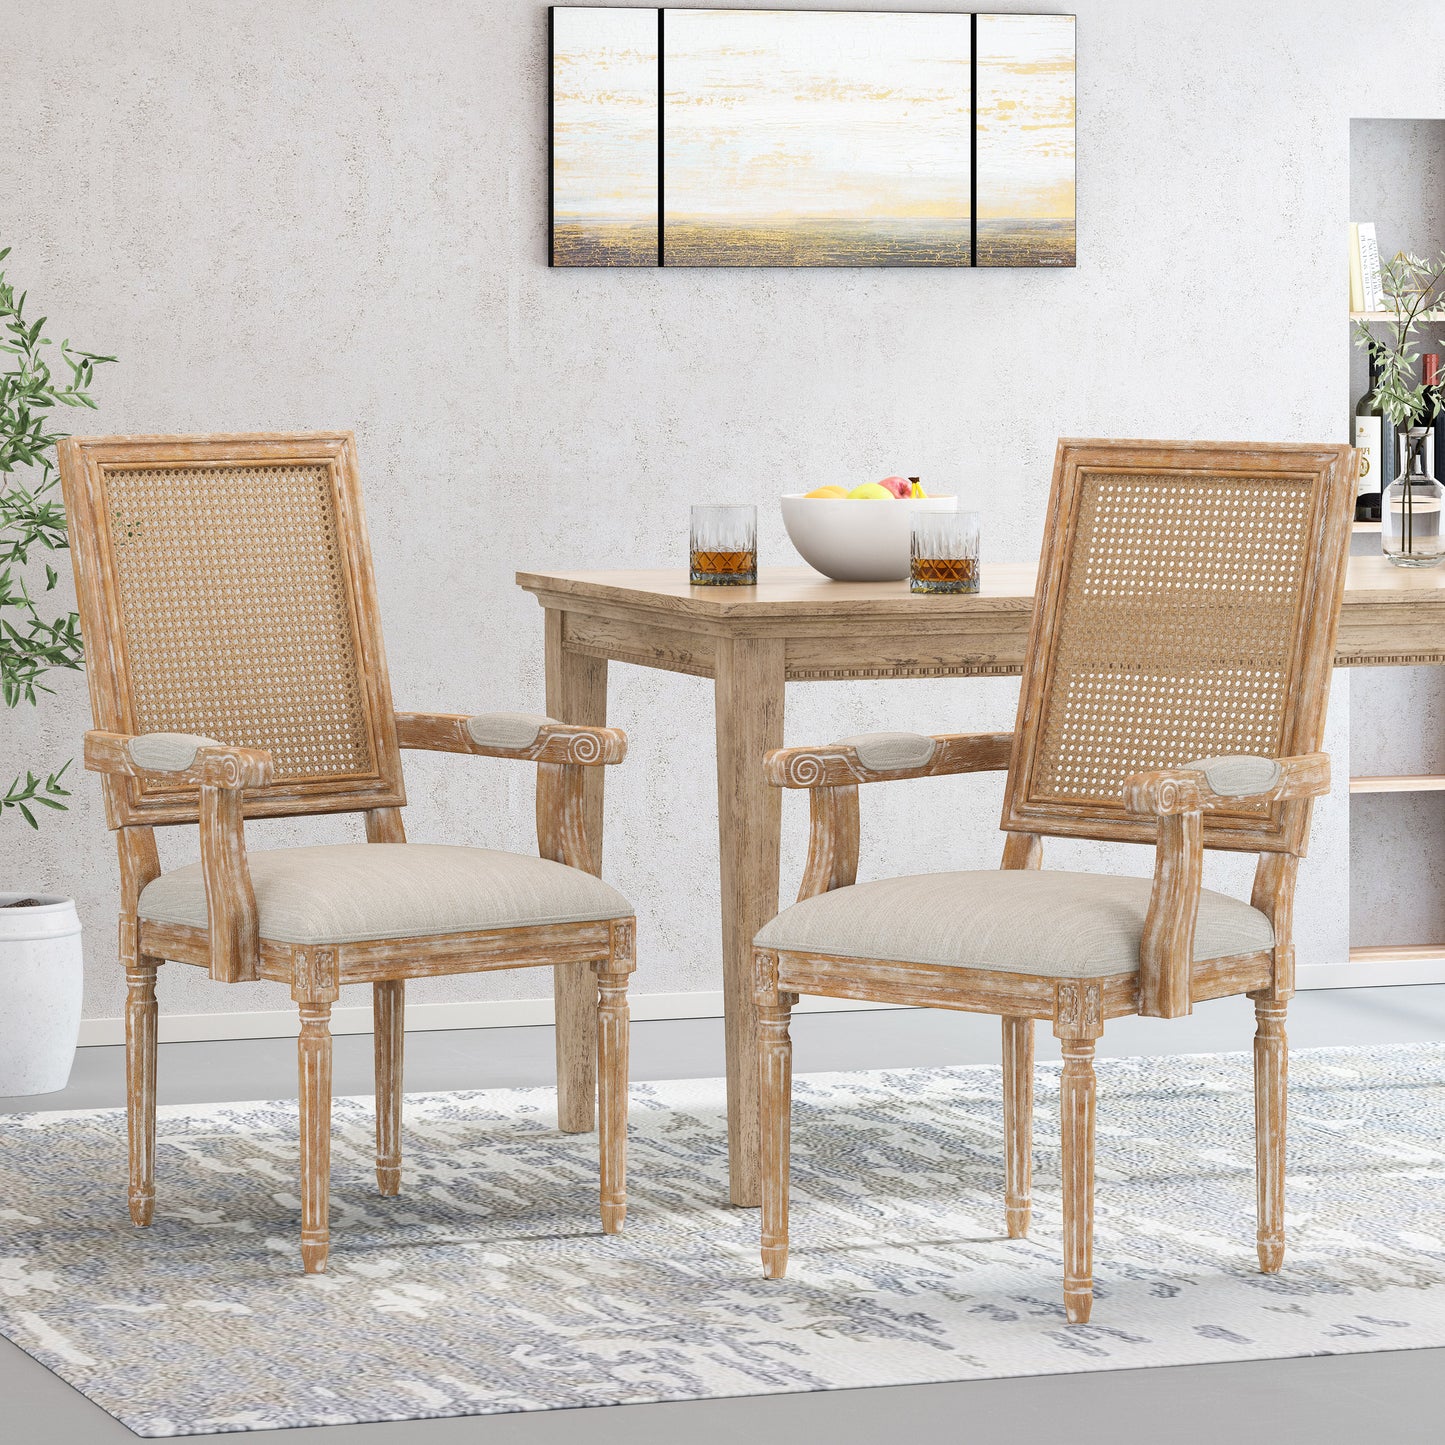 Zentner French Country Upholstered Wood and Cane Upholstered Dining Chairs, Set of 2